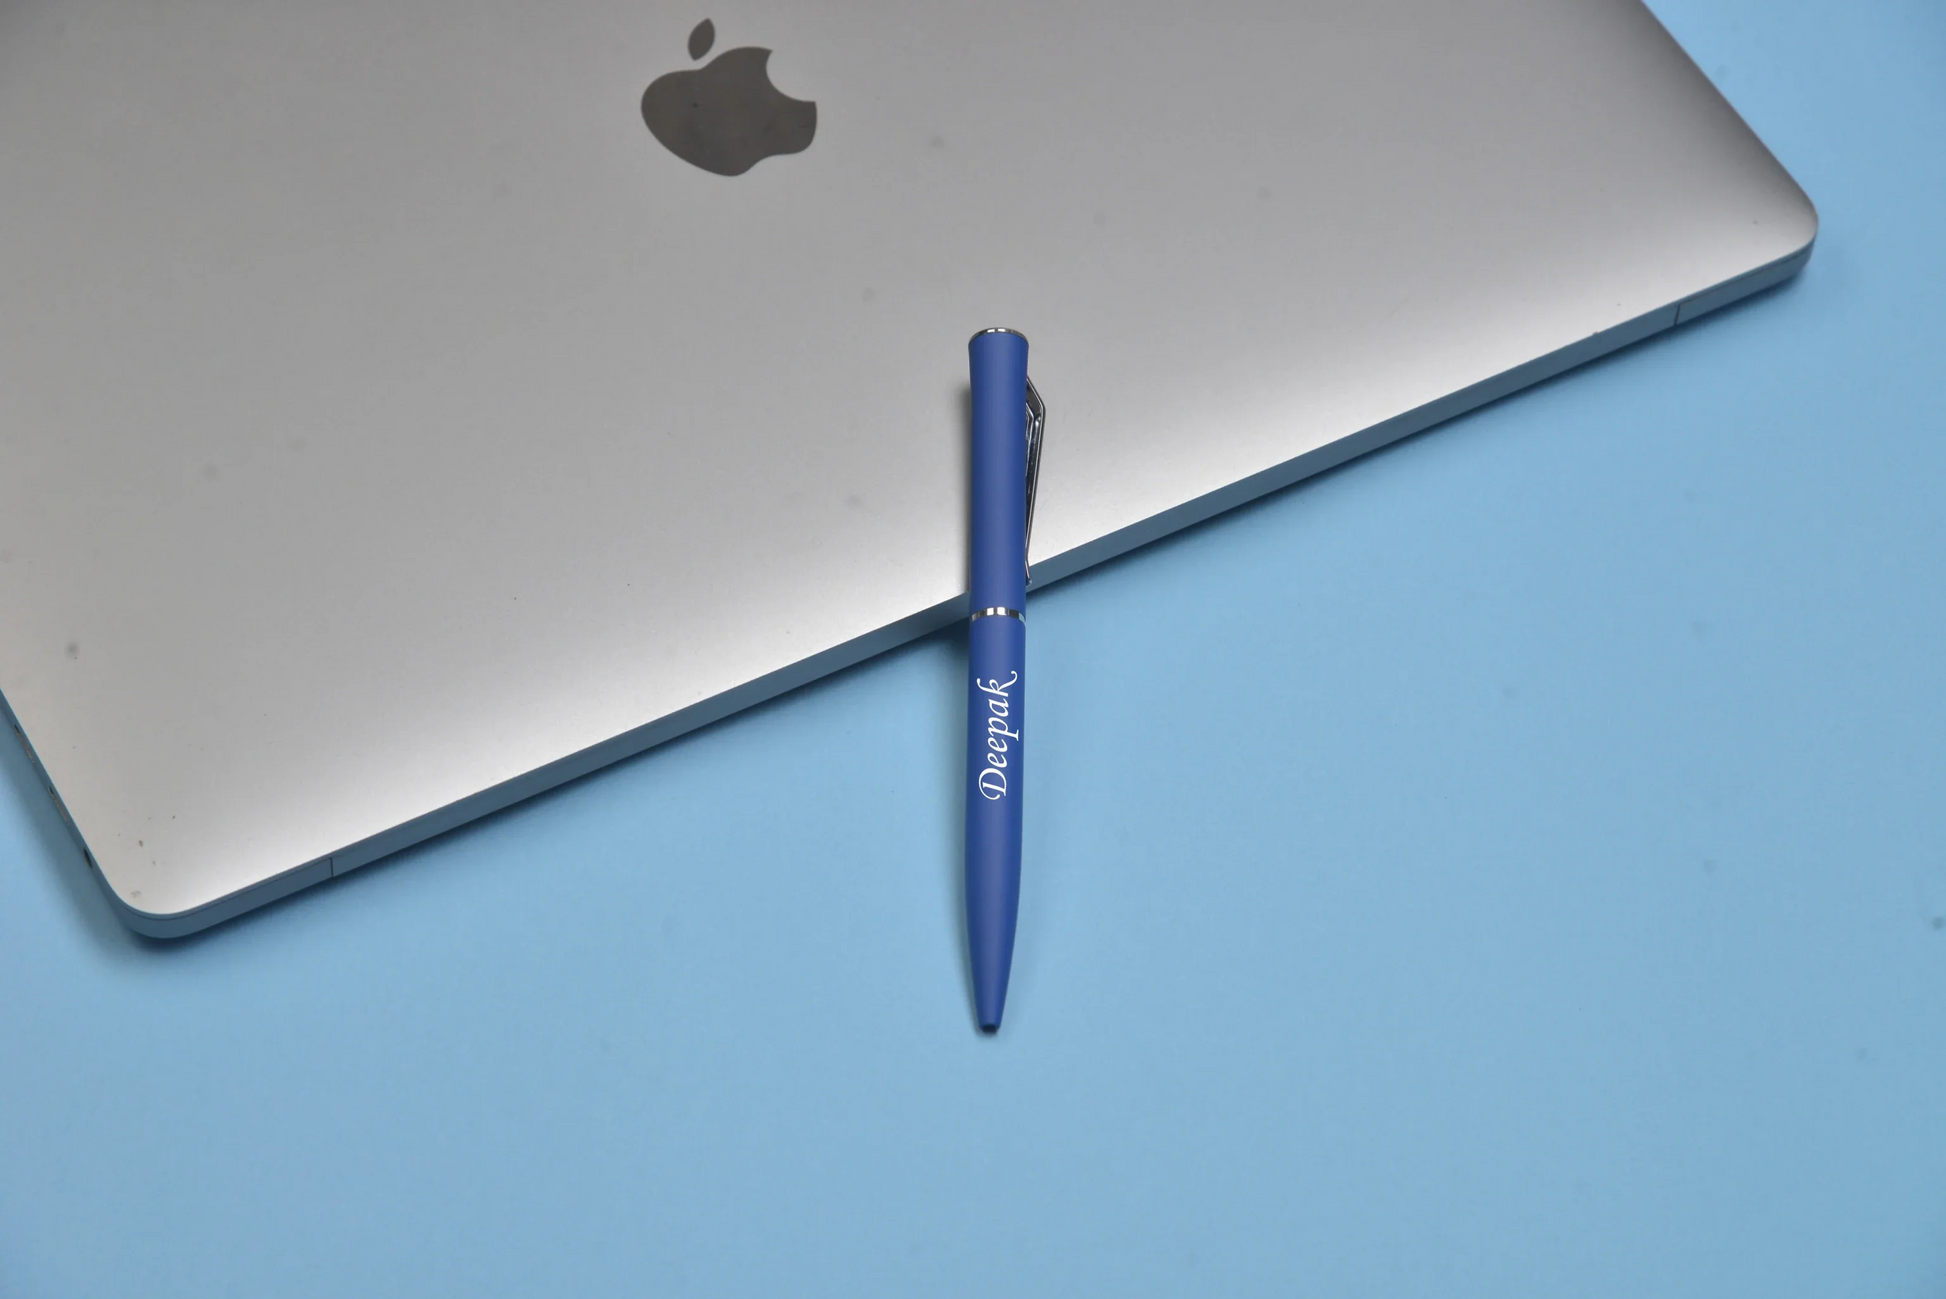 "Write with flair and creativity with our artistic and expressive pen. Perfect for artists, writers, and anyone seeking to unleash their creativity."